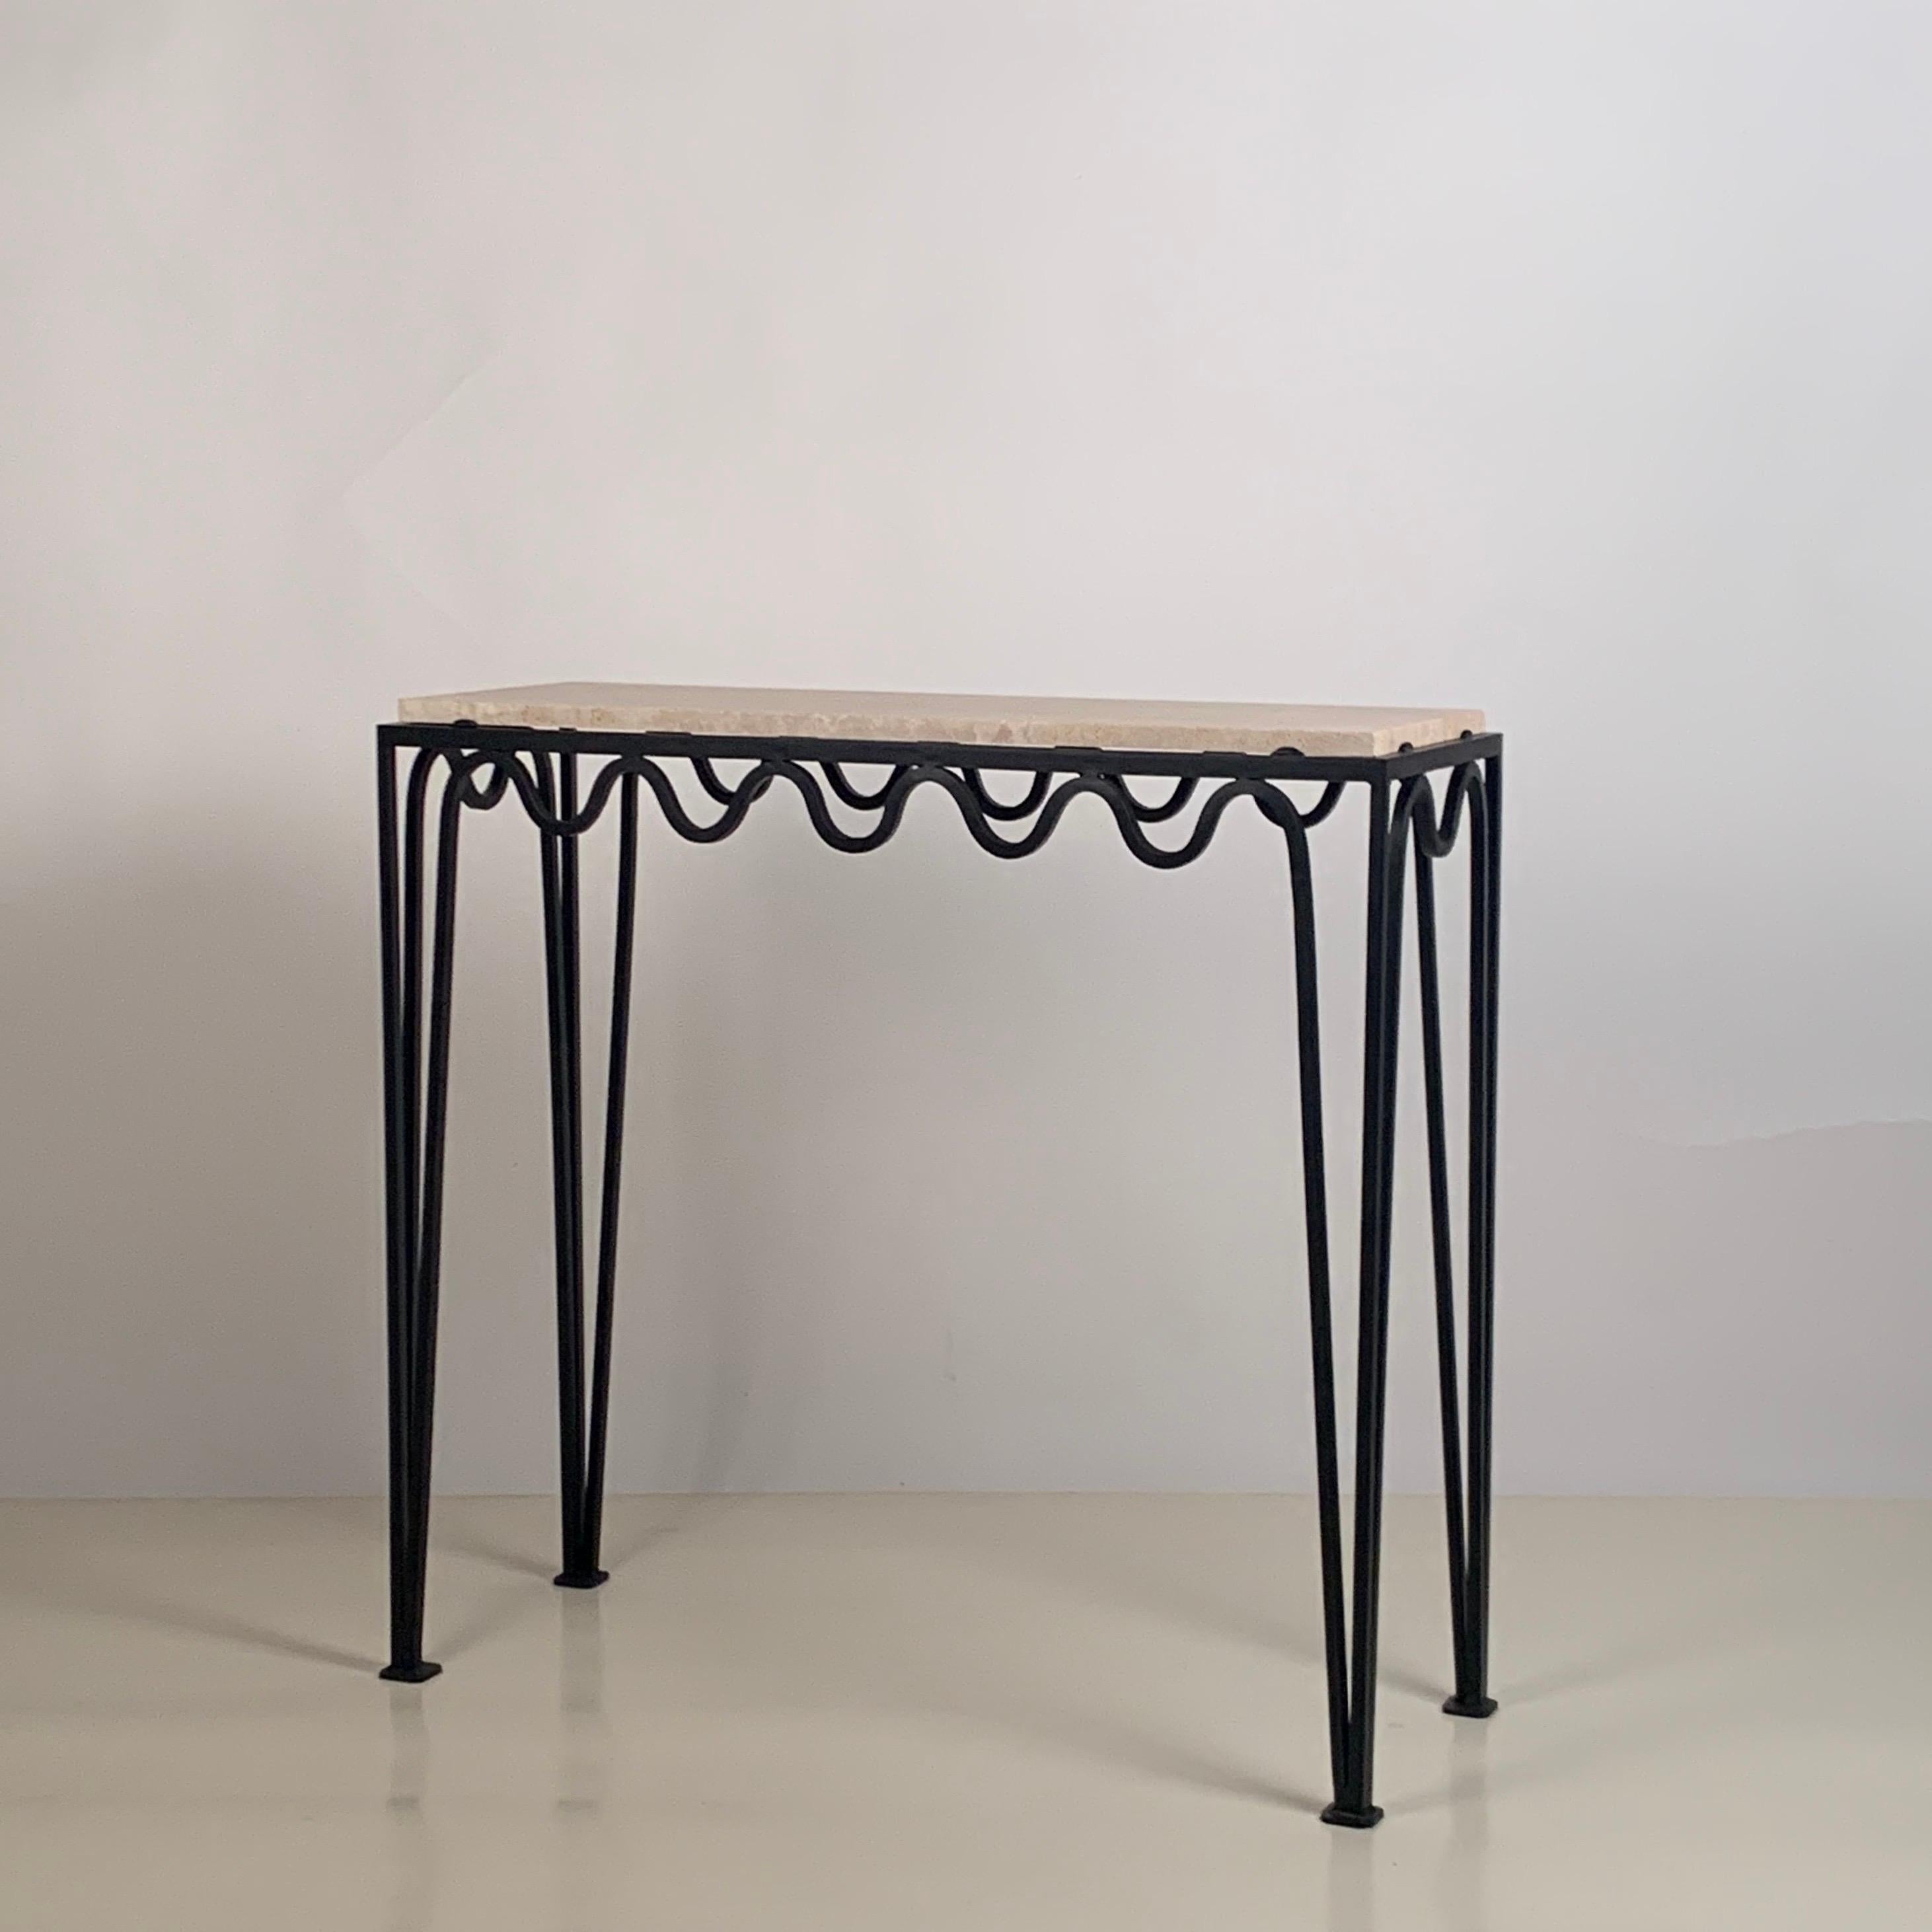 Chic 'Méandre' travertine console by Design Frères.

Blackened steel base fitted with an Italian travertine top.

Inspired by the timeless aesthetic of French modern design, this console from our exclusive Design Frères line is handmade in our